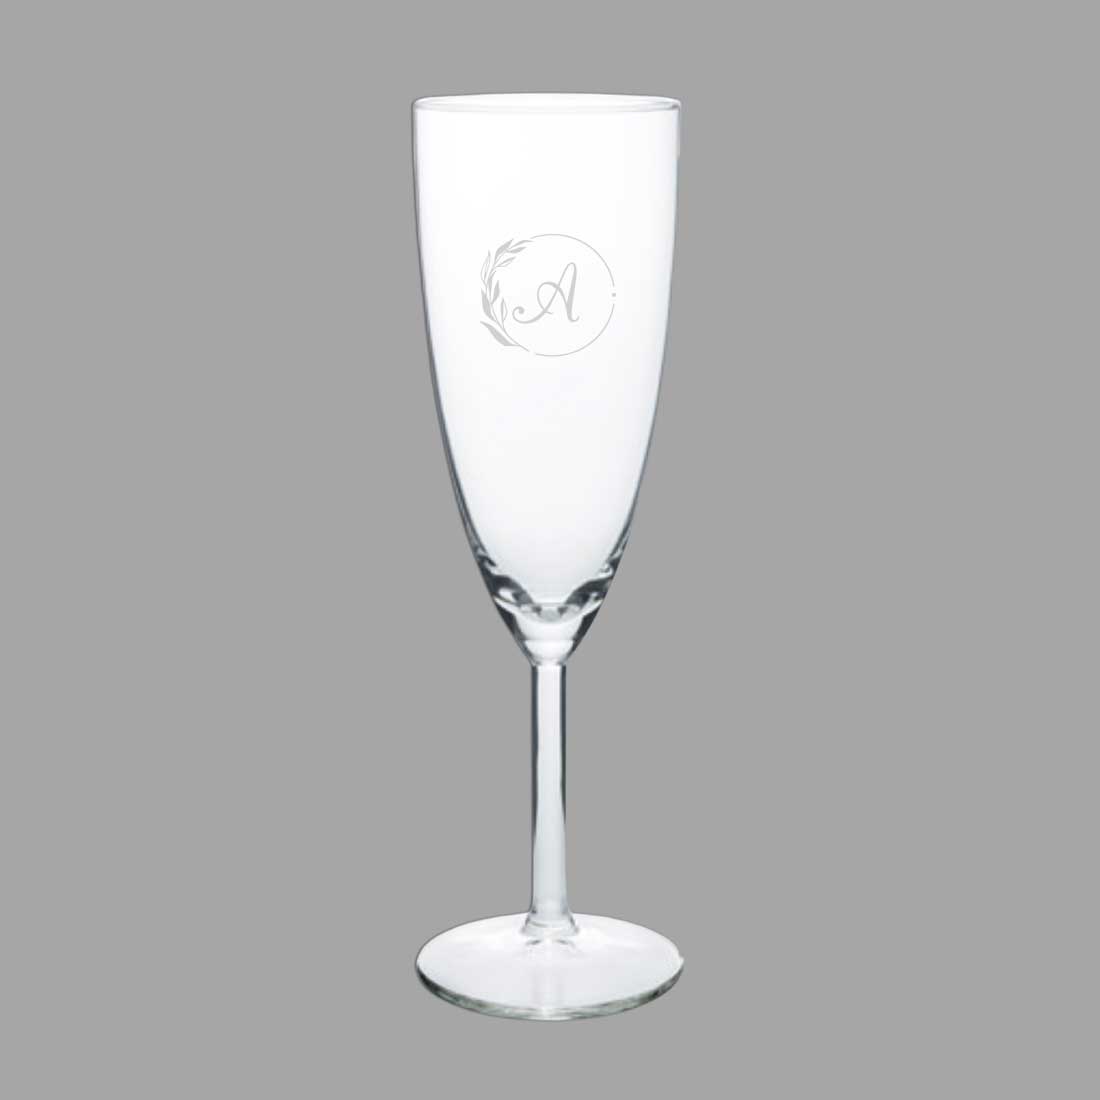 Champagne Flute Glass - Engraved Glass With Name